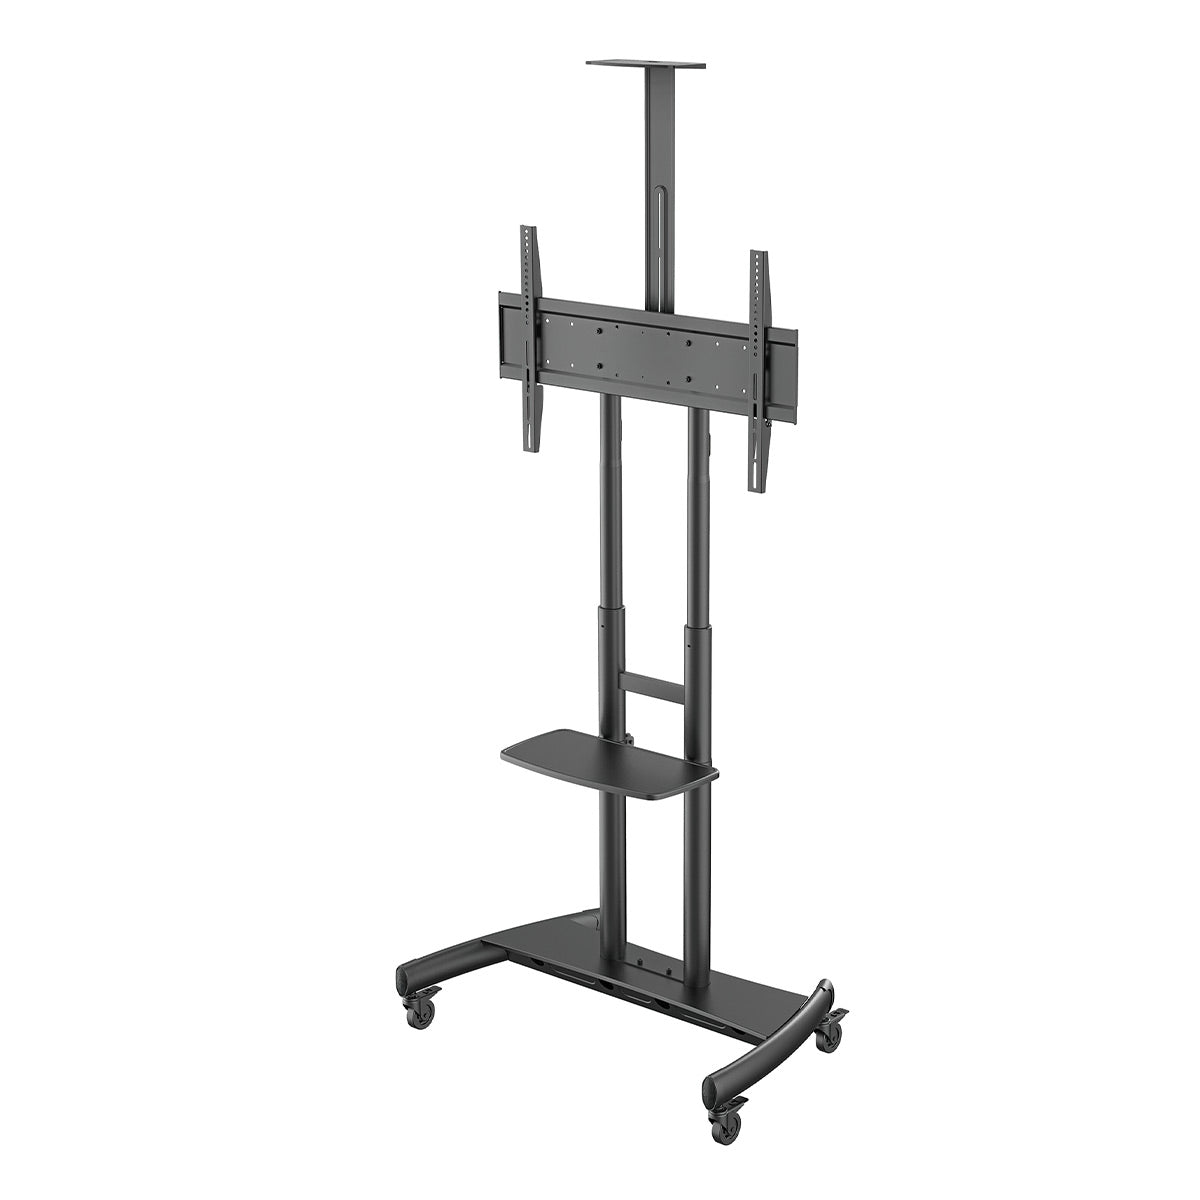 Photos - Mount/Stand Kanto MTM86PL Height-Adjustable Rolling TV Stand for 55" - 86" TVs with De 